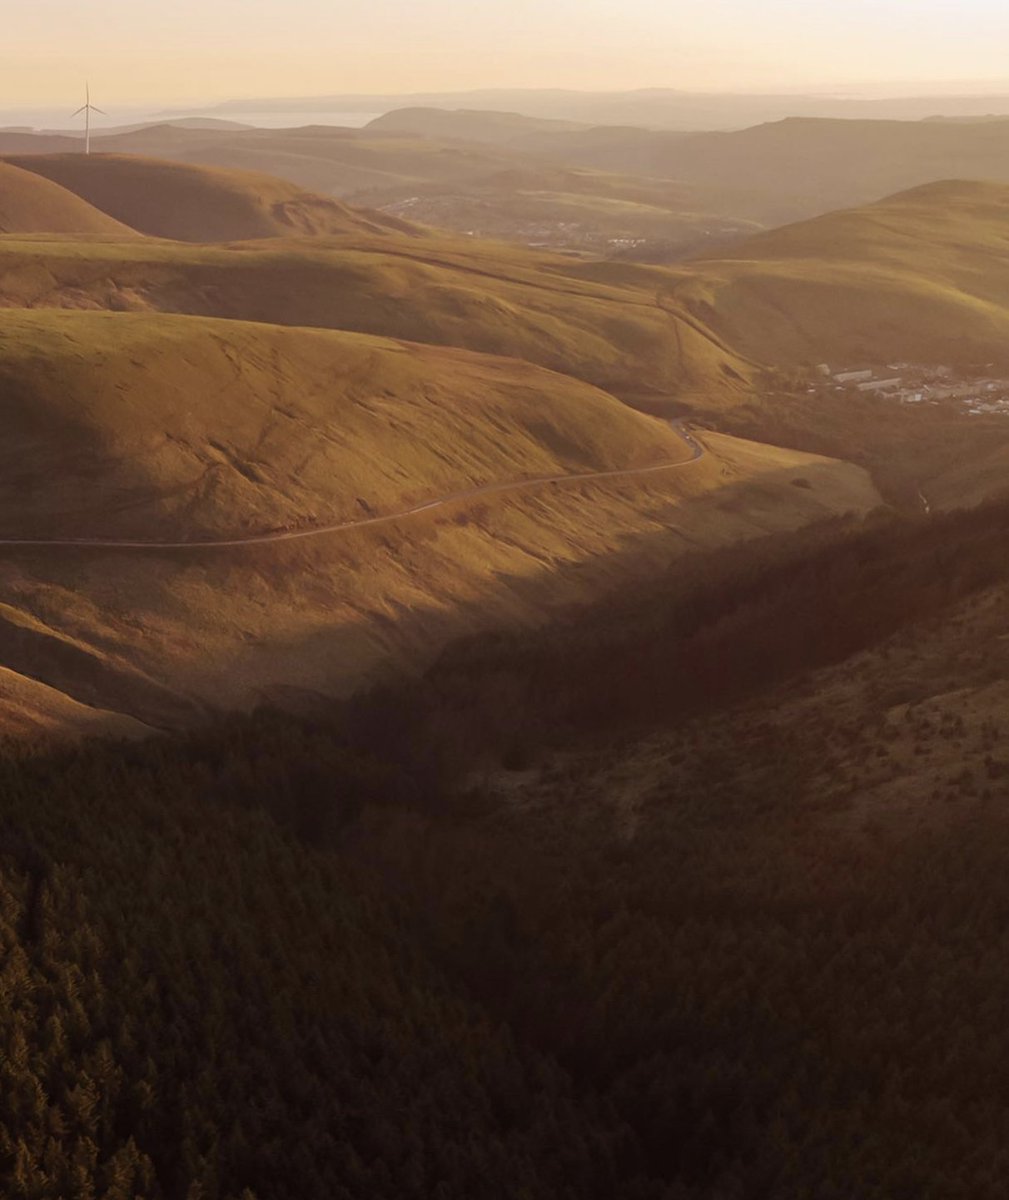 Views that go on and on… With rolling hills, mighty mountains and magical forests - the landscapes of our valleys are a sight to behold! 📍 Bwlch Mountain 📸 katesscapes (Instagram) visitbridgend.co.uk #VisitBridgend #VisitWales #FindYourEpic